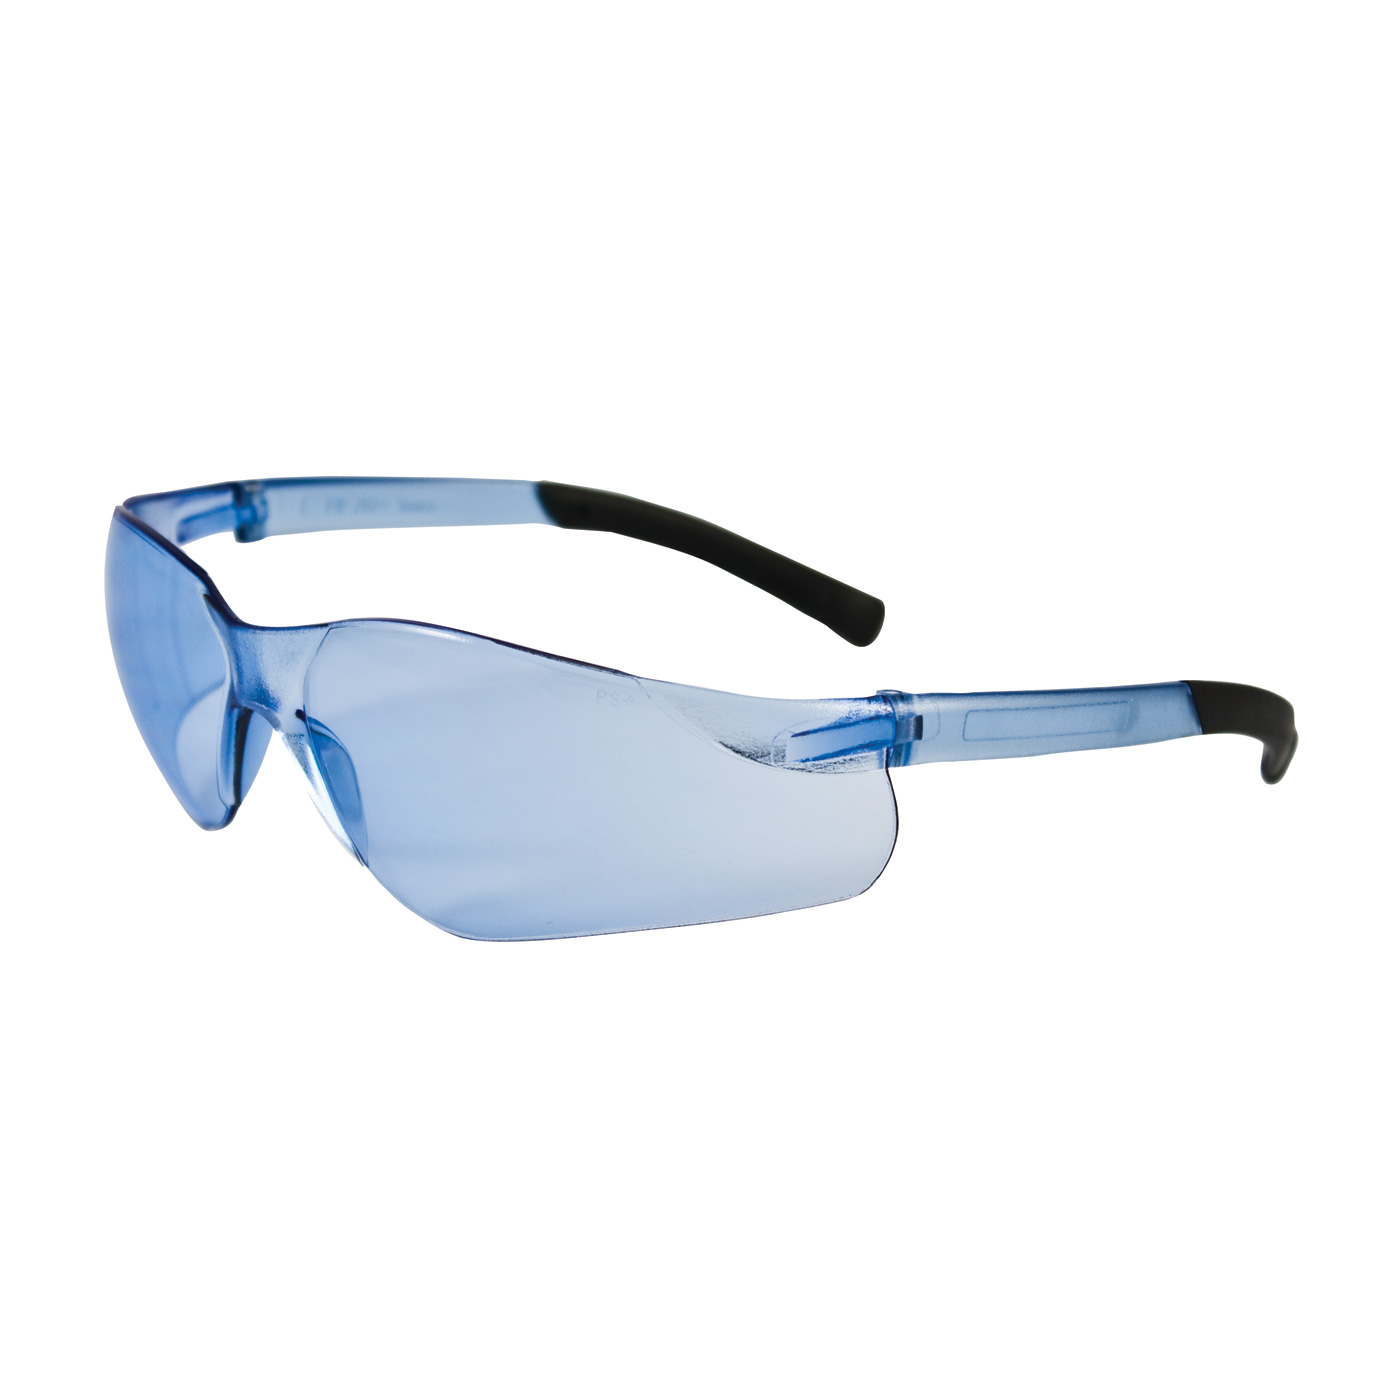 PIP 250-06-5503 Zenon Z13 Rimless Safety Glasses with Light Blue Temple, Light Blue Lens and Anti-Scratch Coating PID-250 06 5503